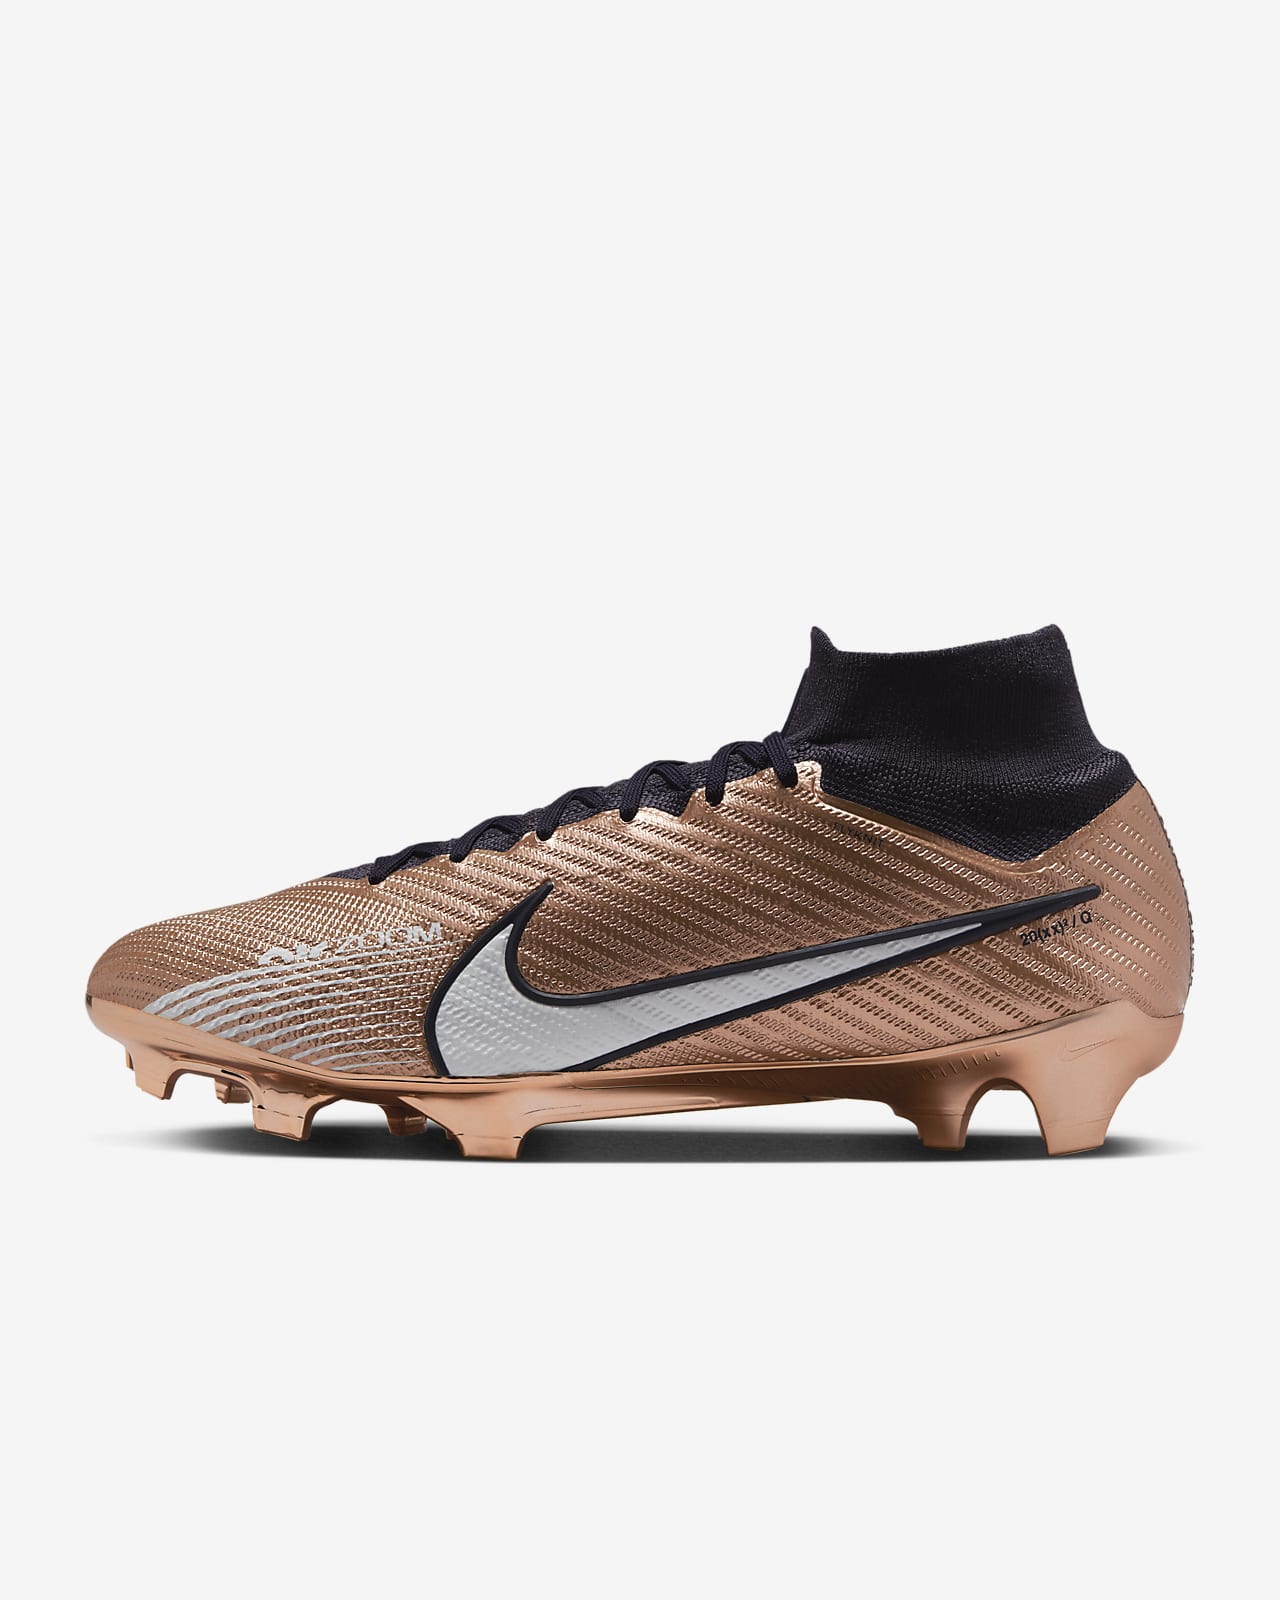 Nike Zoom Mercurial Superfly 9 Elite FG Firm-Ground Cleats. JP